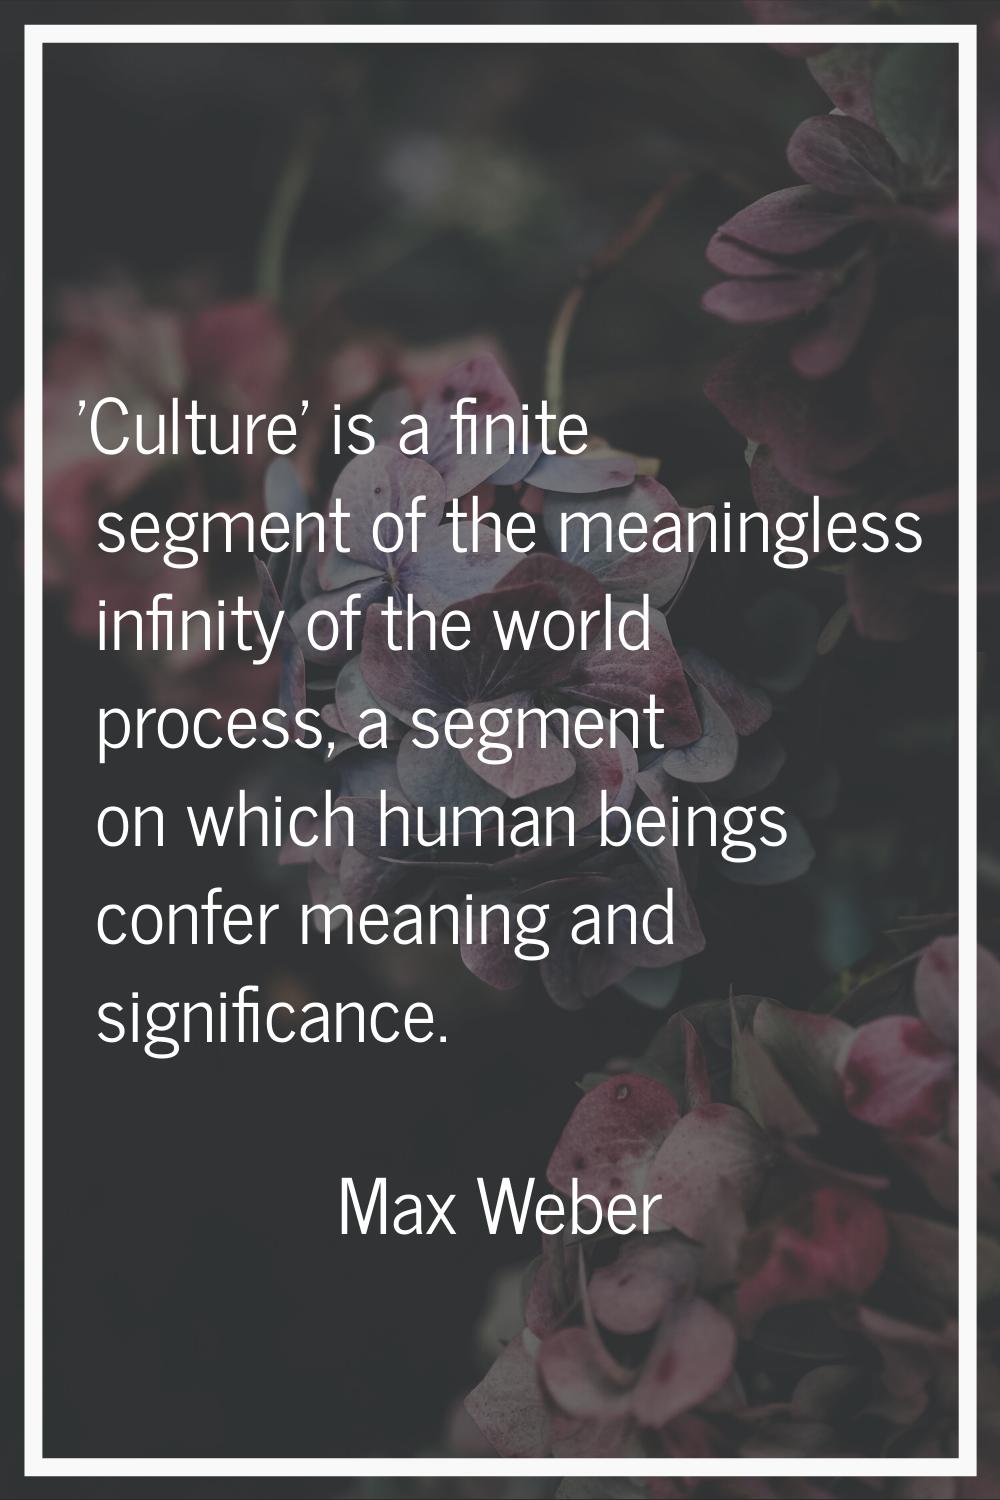 'Culture' is a finite segment of the meaningless infinity of the world process, a segment on which 